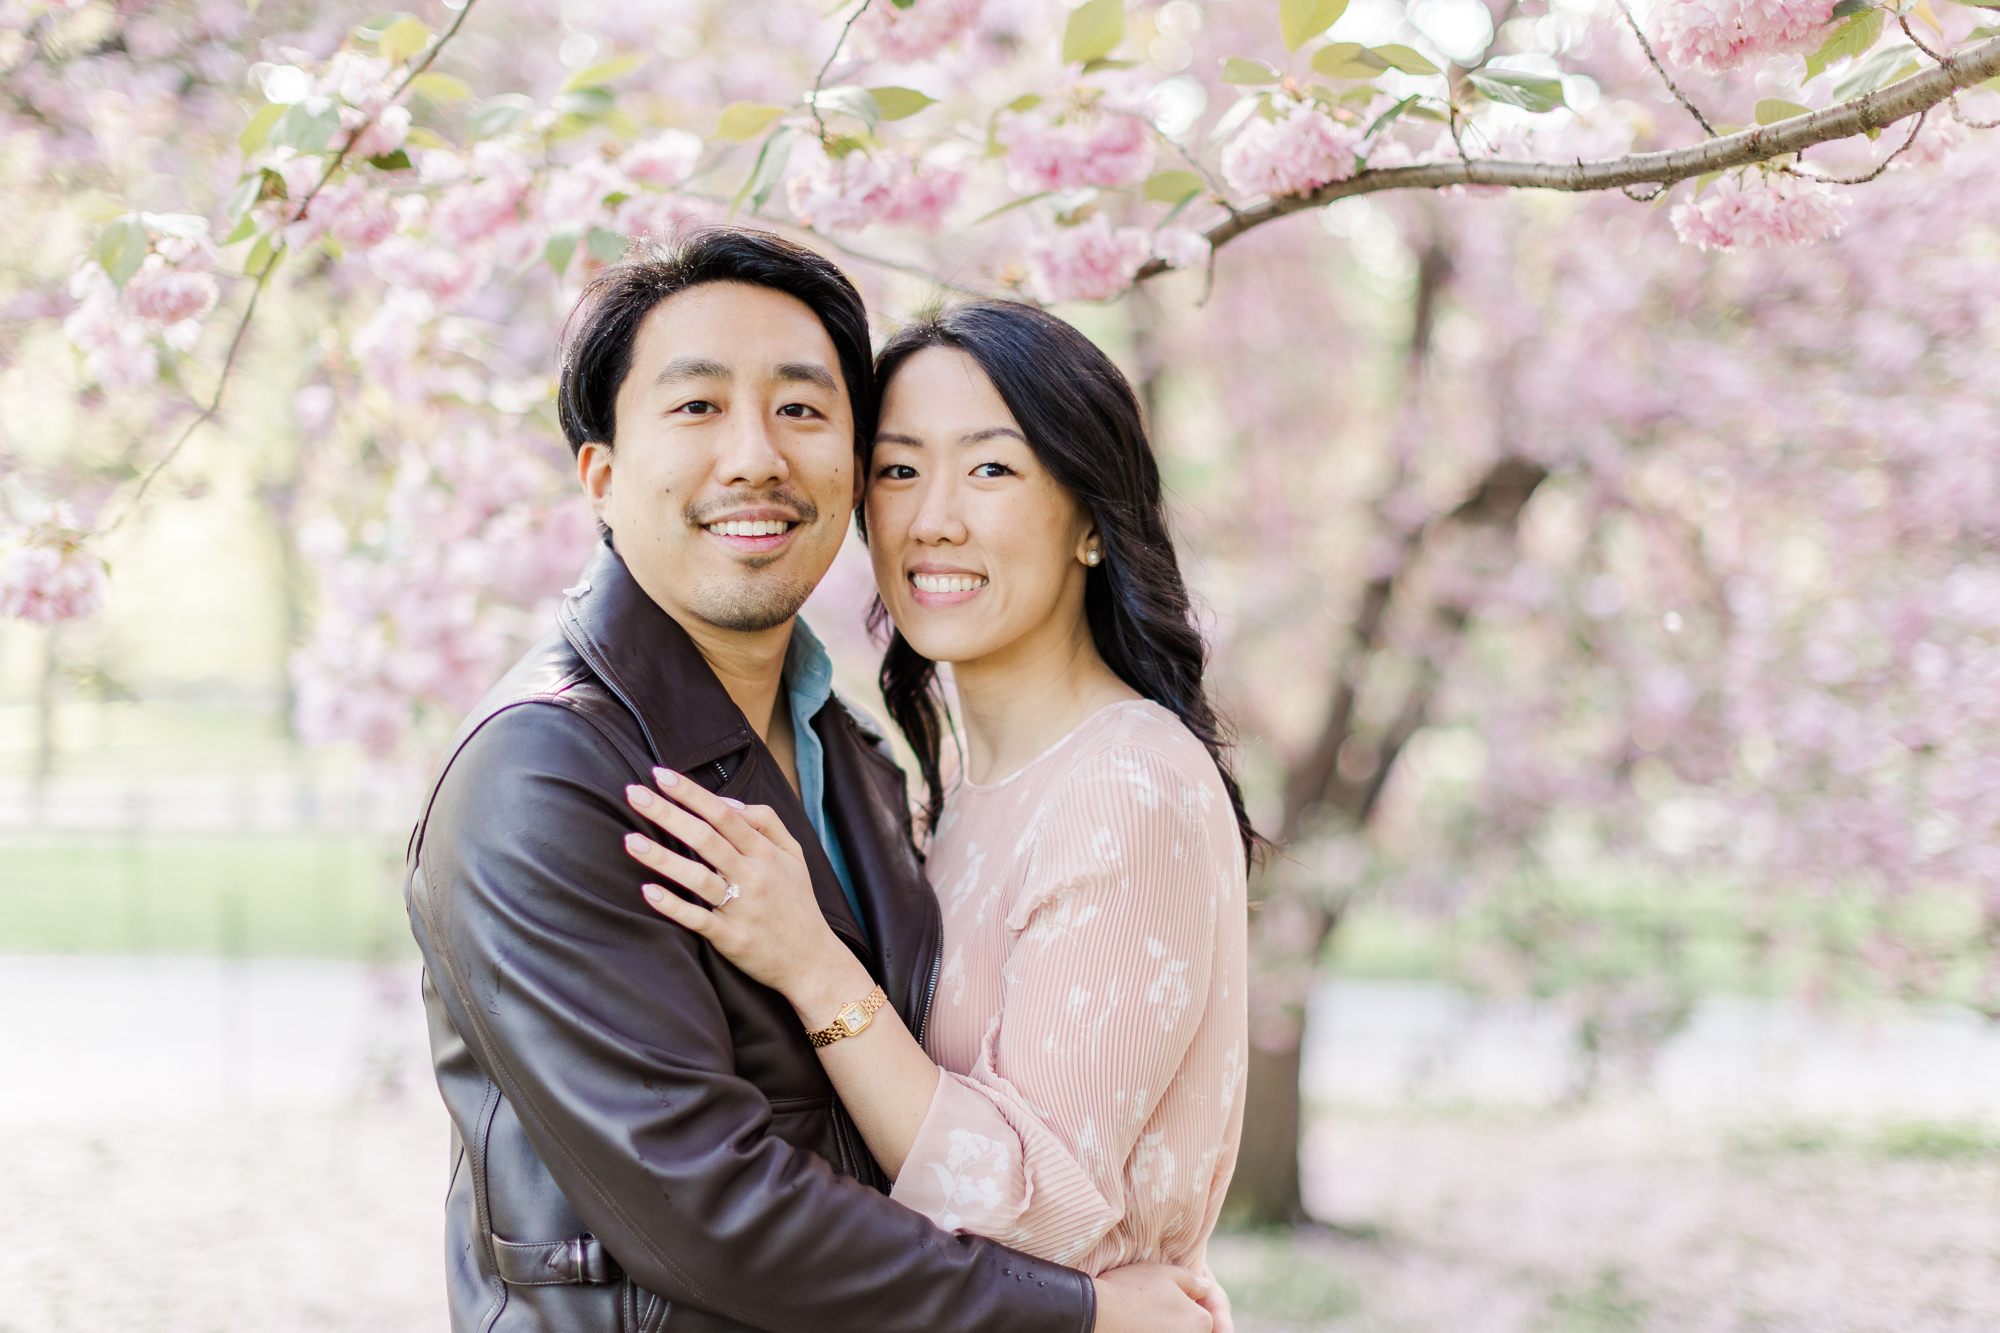 Playful Engagement Photos With Cherry Blossoms in NYC